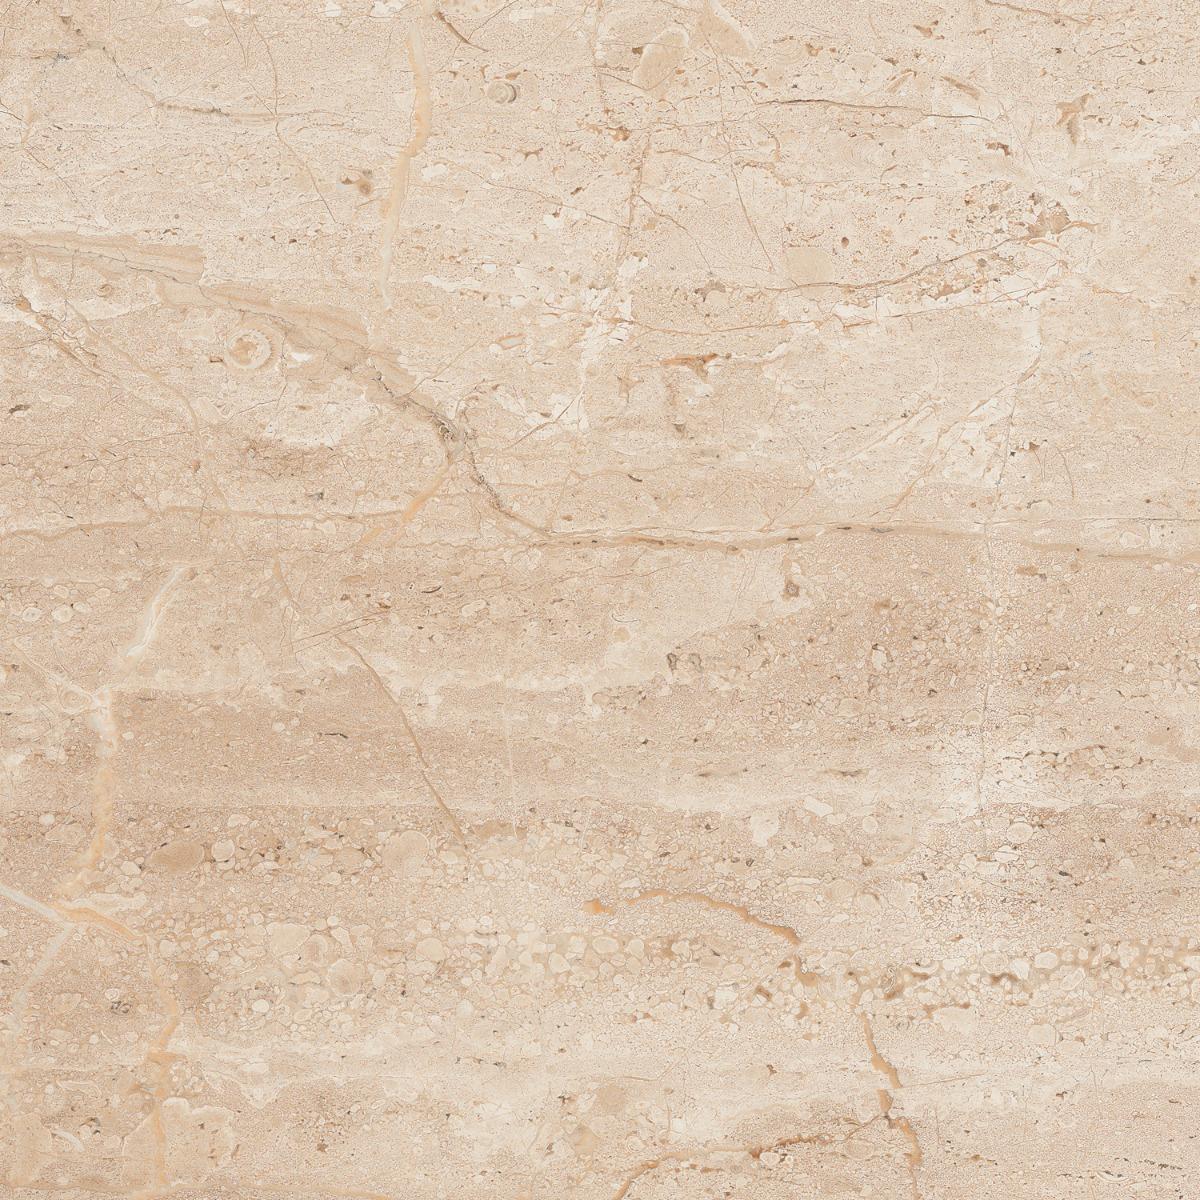 Marble Tiles for Bathroom Tiles, Living Room Tiles, Kitchen Tiles, Bedroom Tiles, Balcony Tiles, Accent Tiles, Office Tiles, Dining Room Tiles, Bar Tiles, Restaurant Tiles, Hospital Tiles, Bar/Restaurant, Outdoor Area